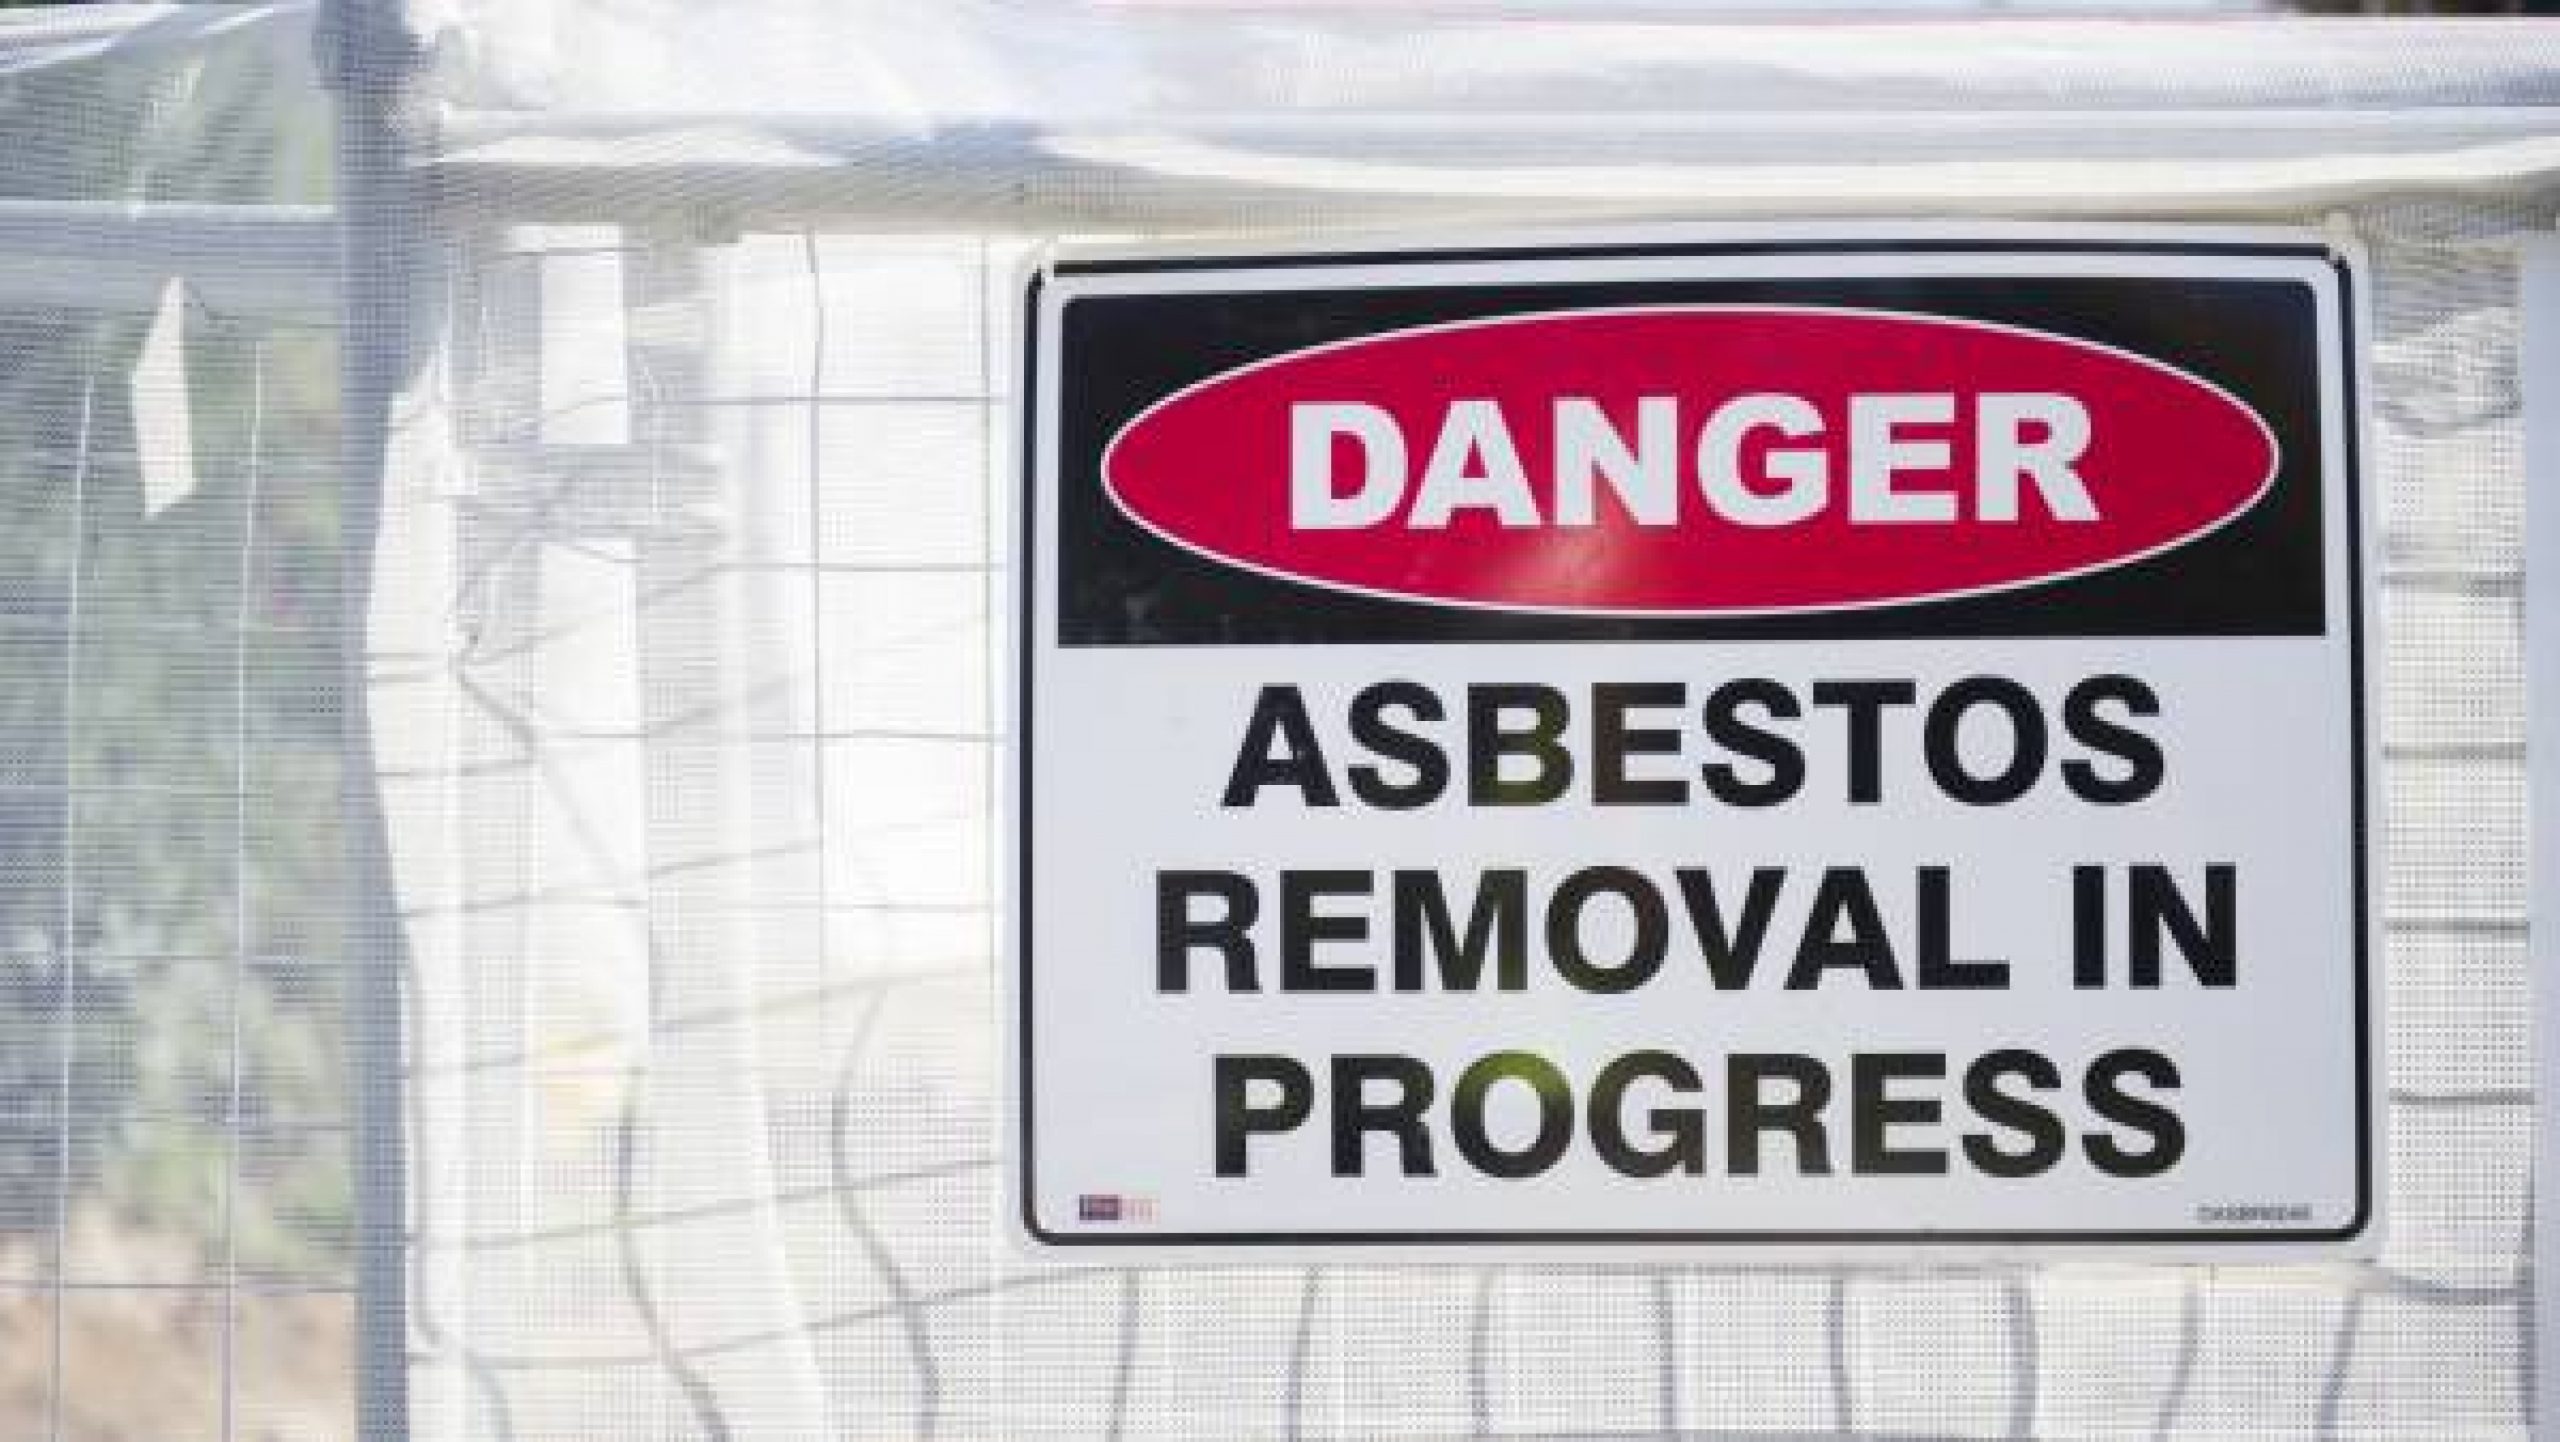 National map to track asbestos sites